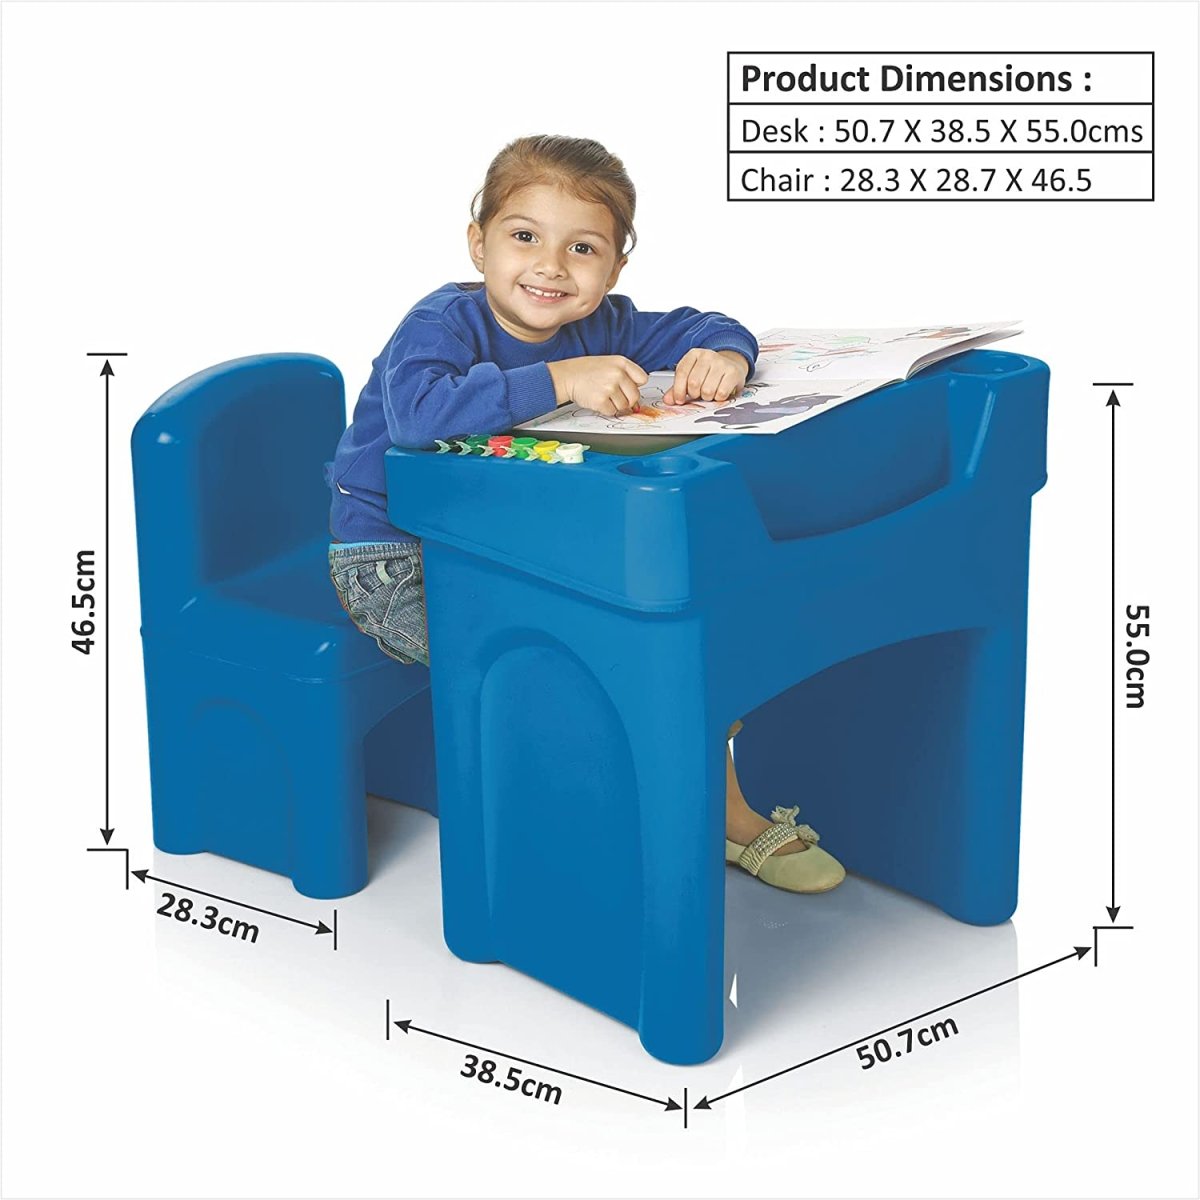 OK Play Little Master Blue Chair & Table Set for Kids - FTFF000394